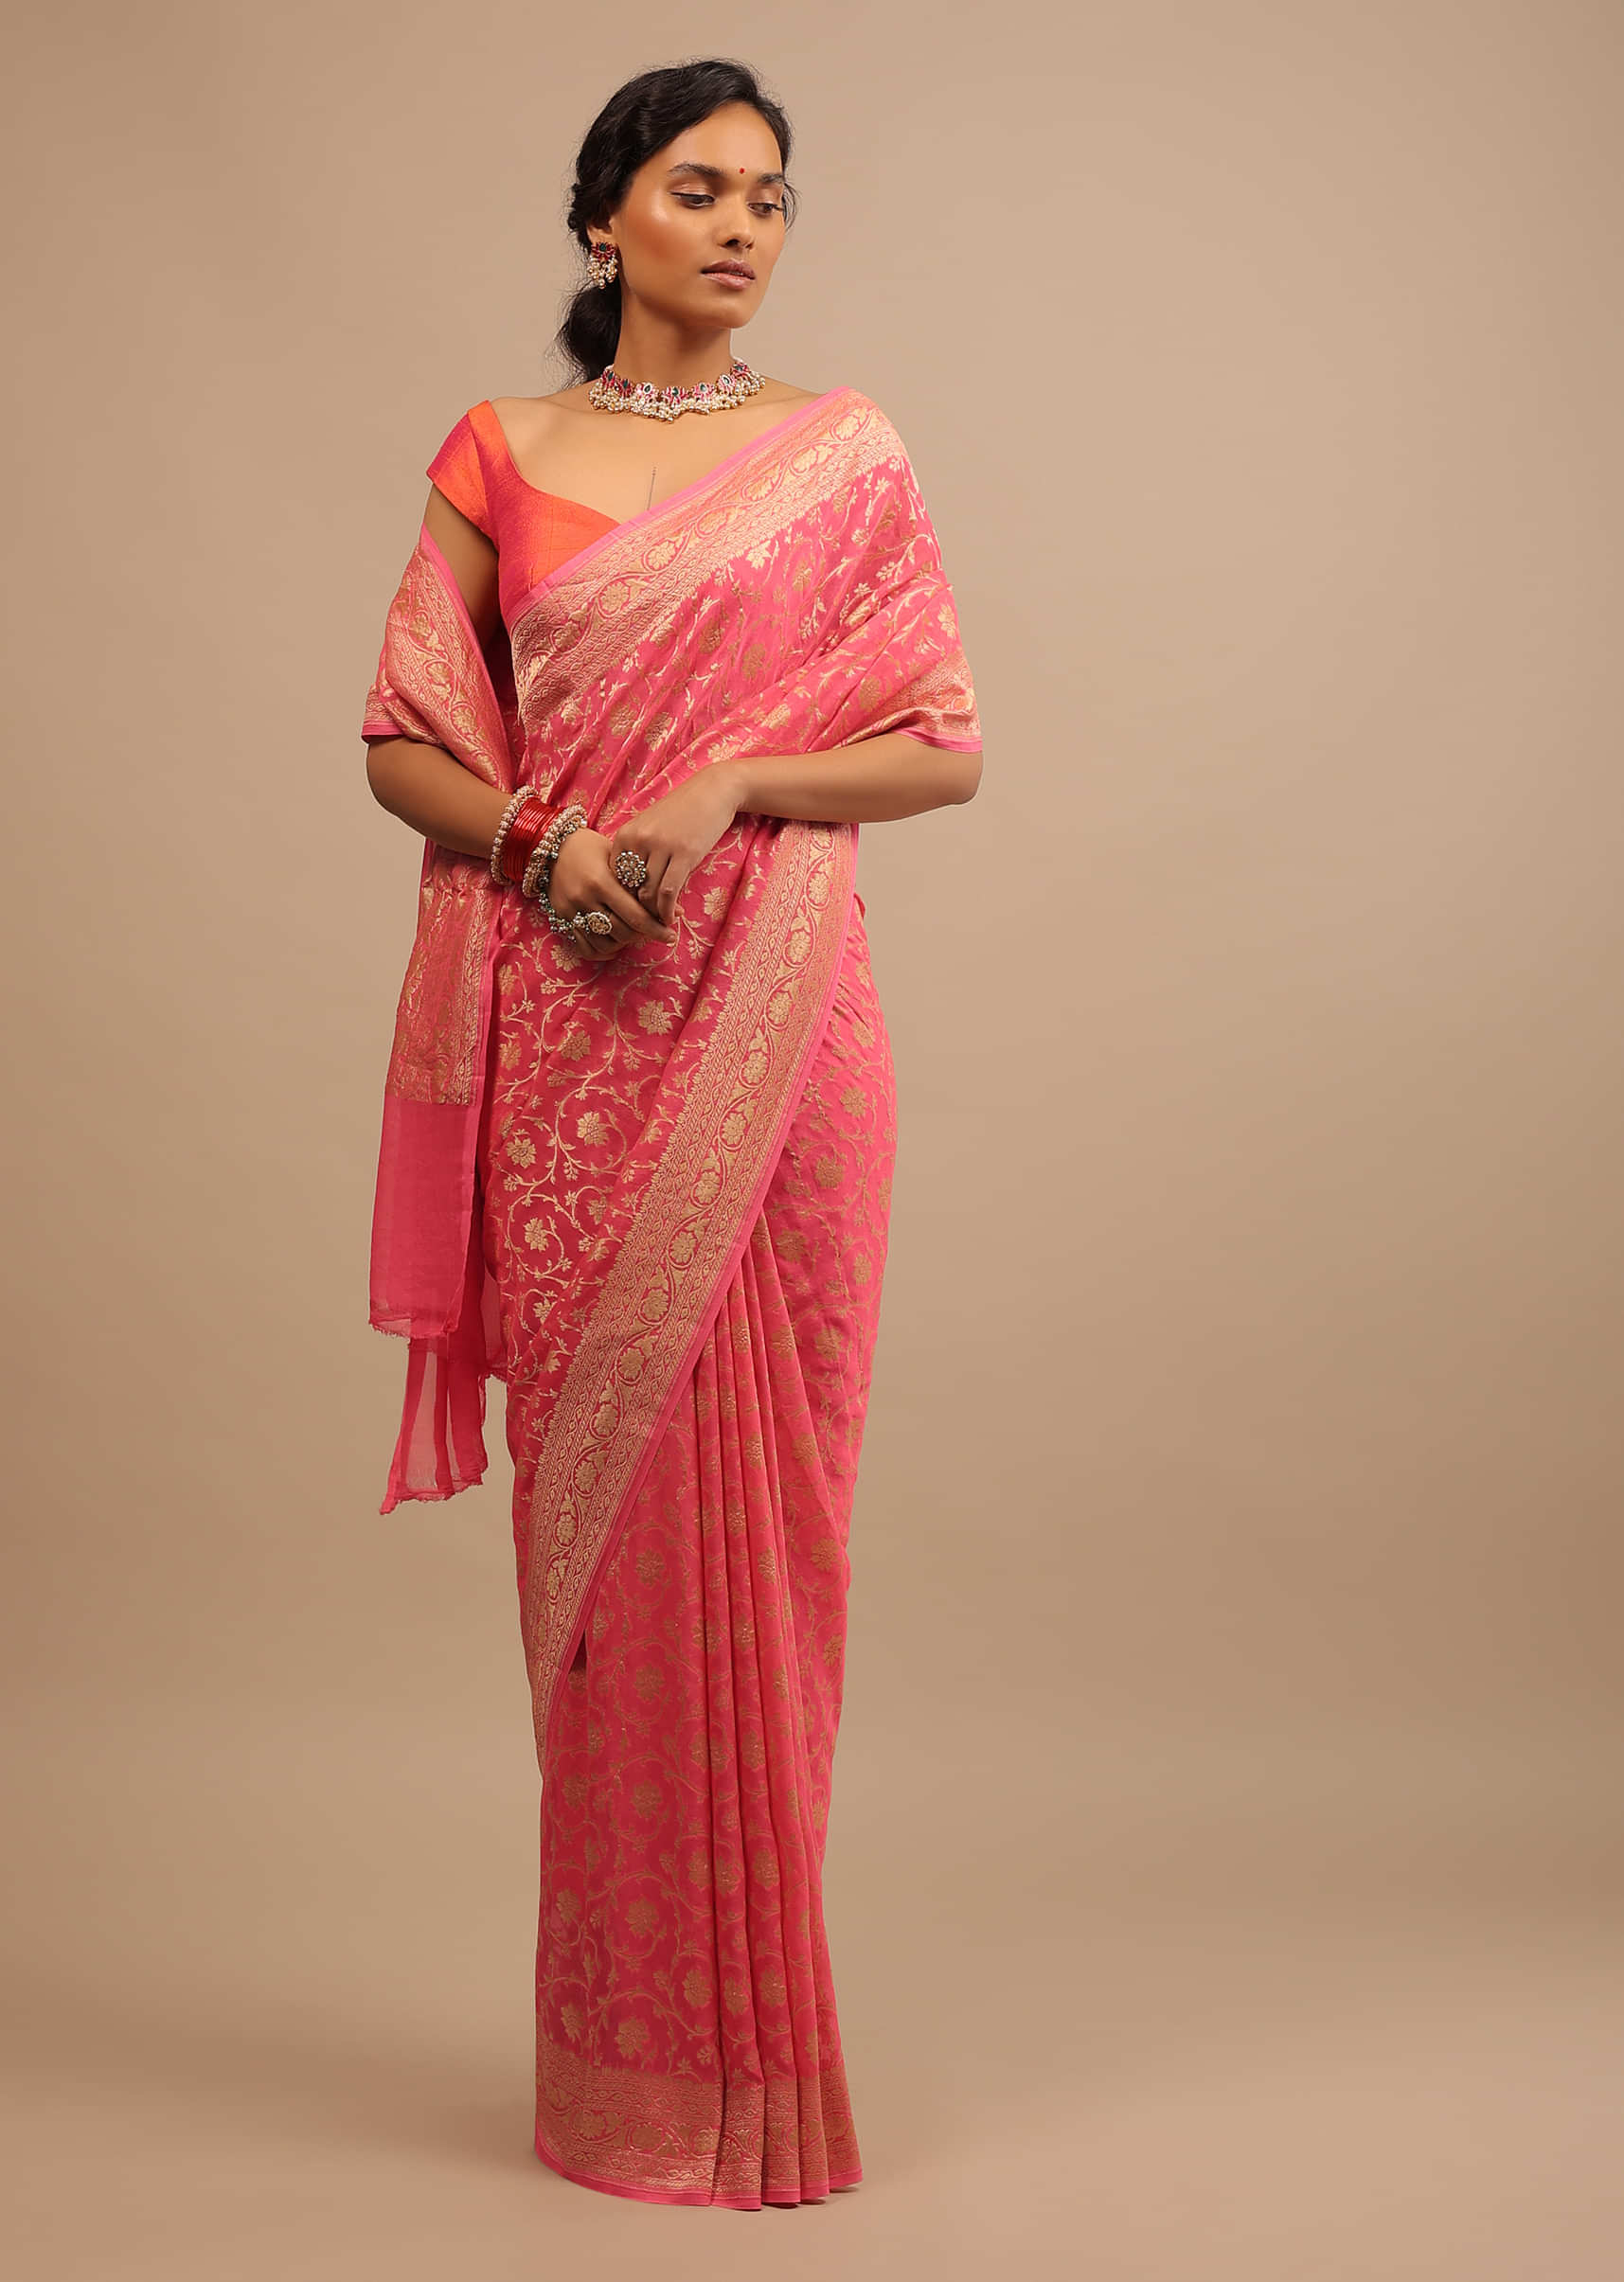 Peach Pink Traditional Georgette Saree With Golden Jaal Work In Floral Motif